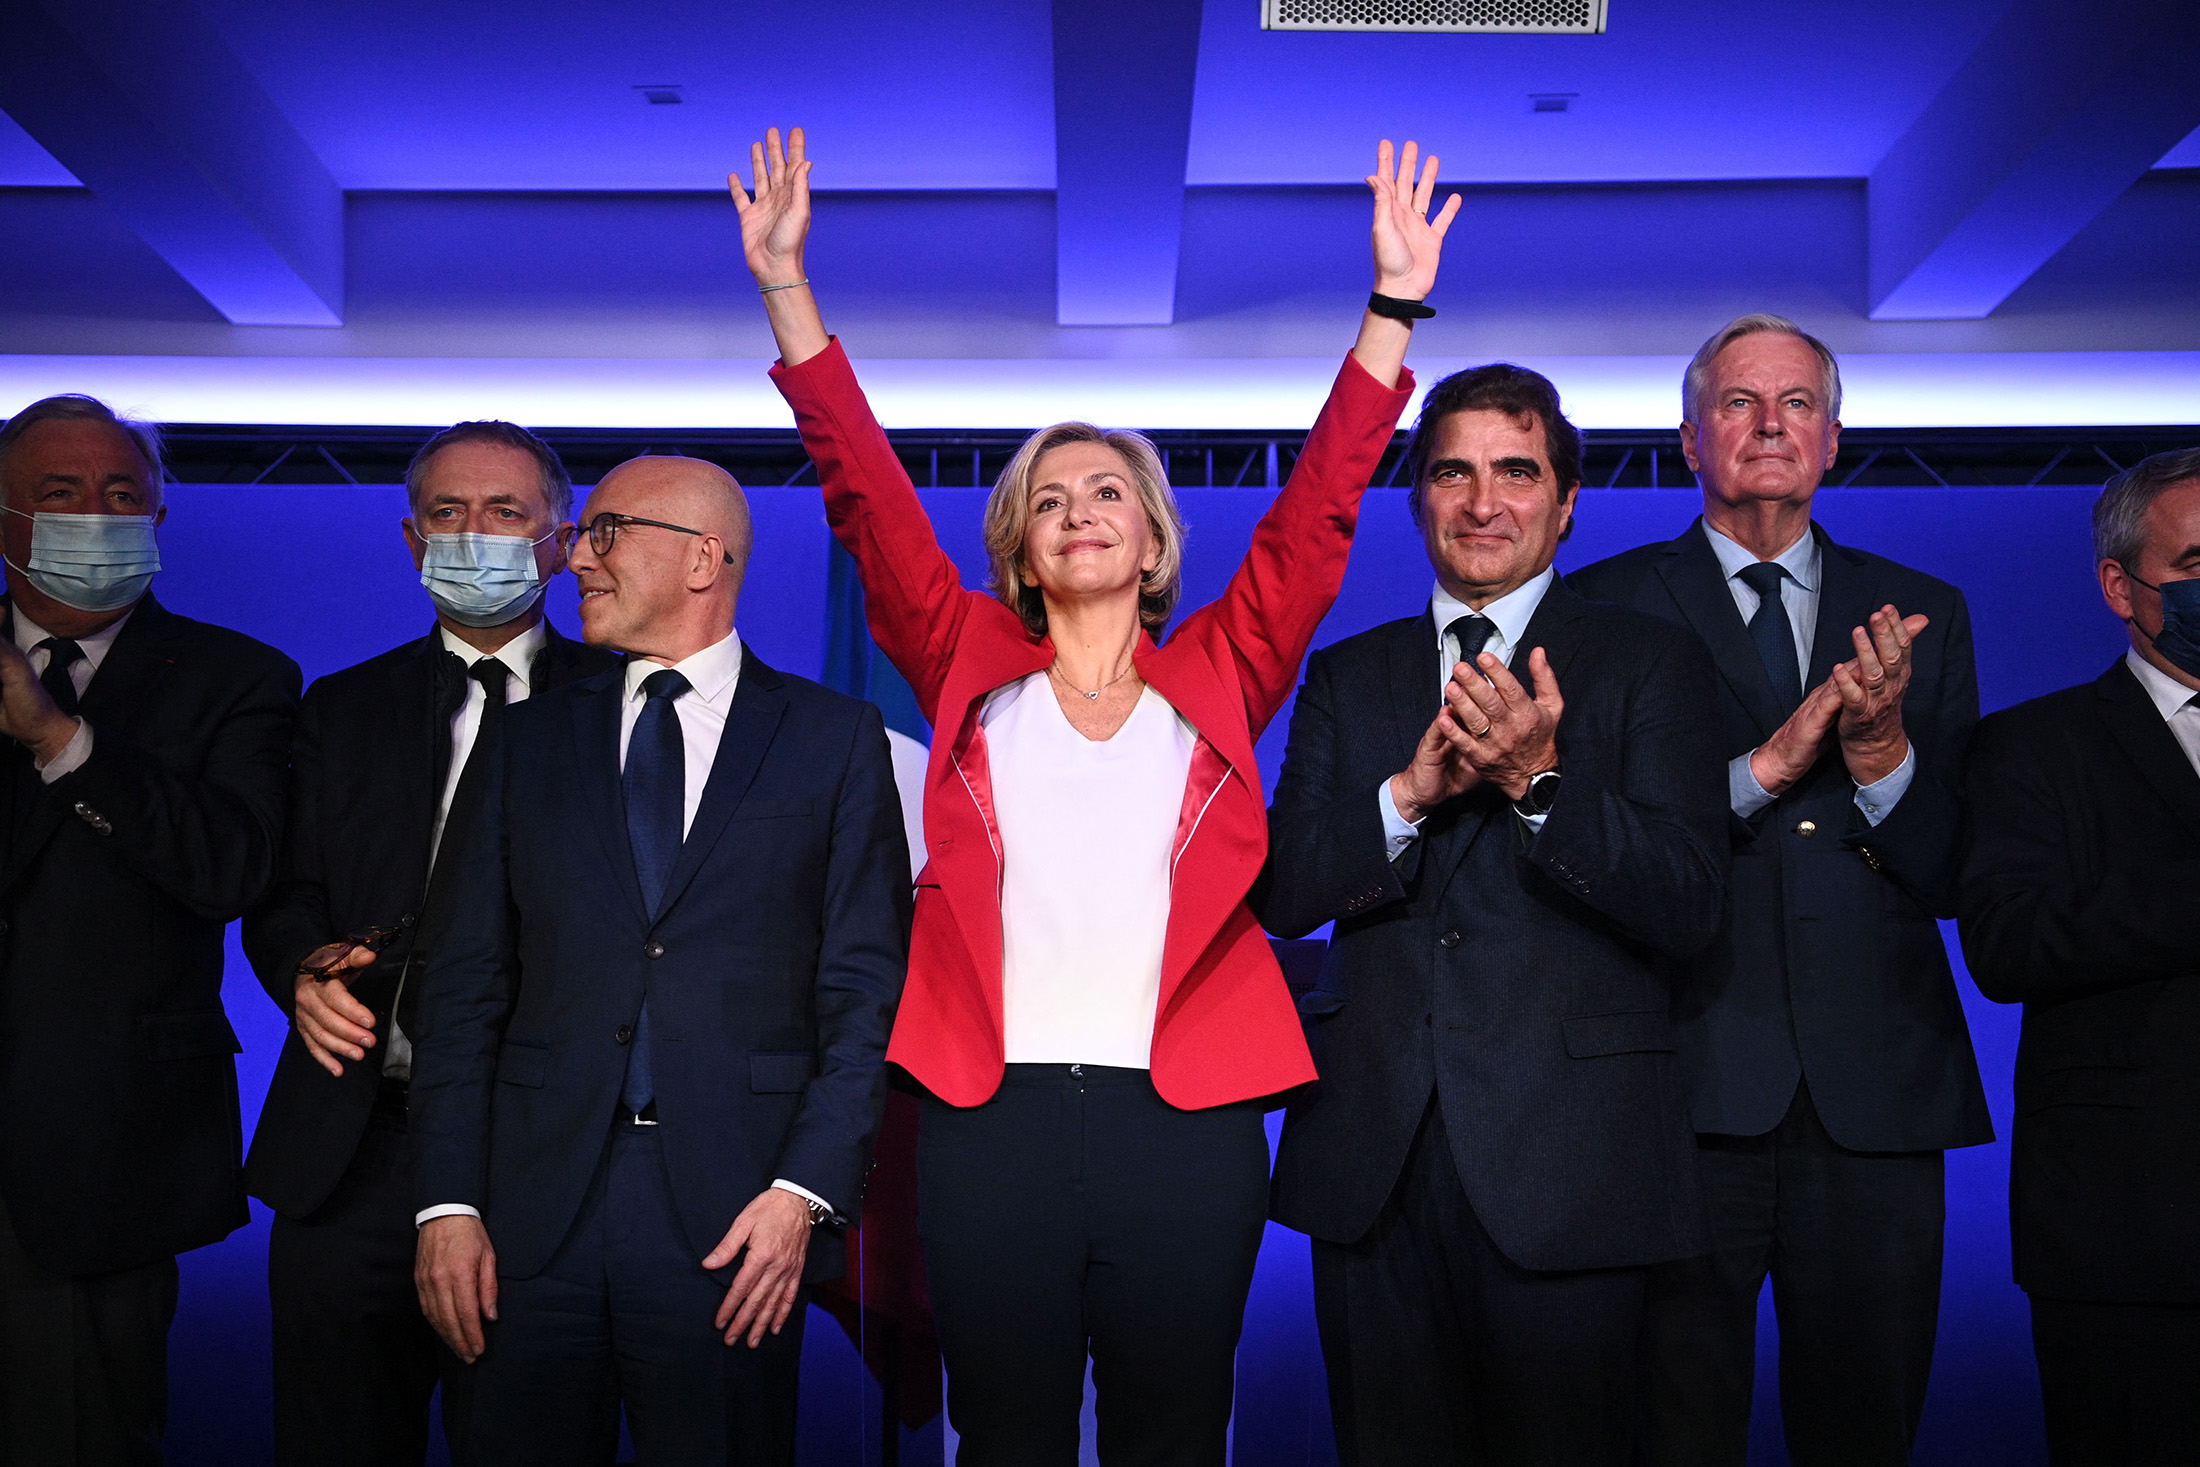 Valerie Pecresse, center, was named Les Republicains’s presidential candidate after a primary  in Paris, on Dec. 4. 